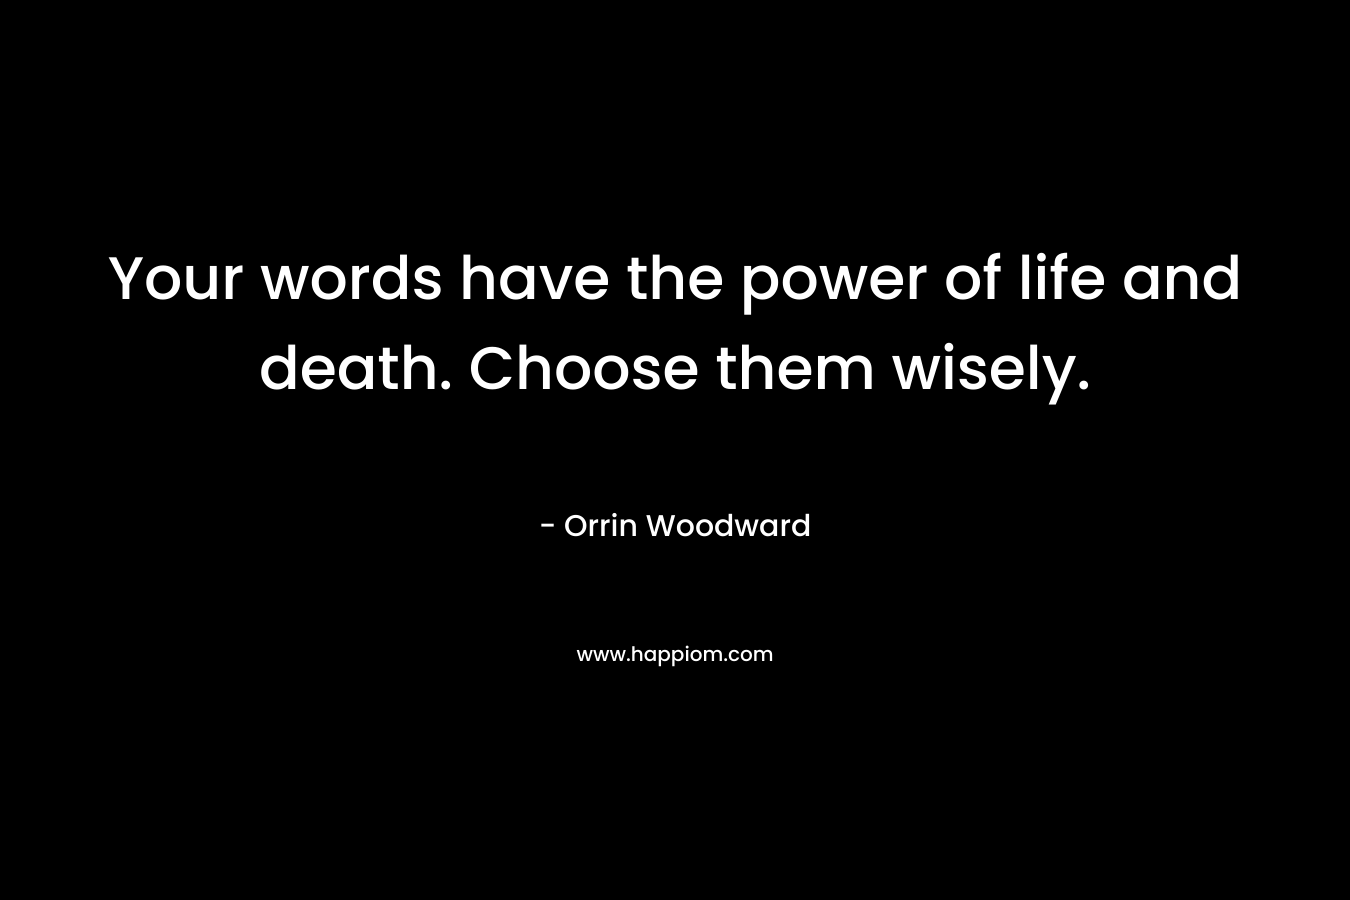 Your words have the power of life and death. Choose them wisely.